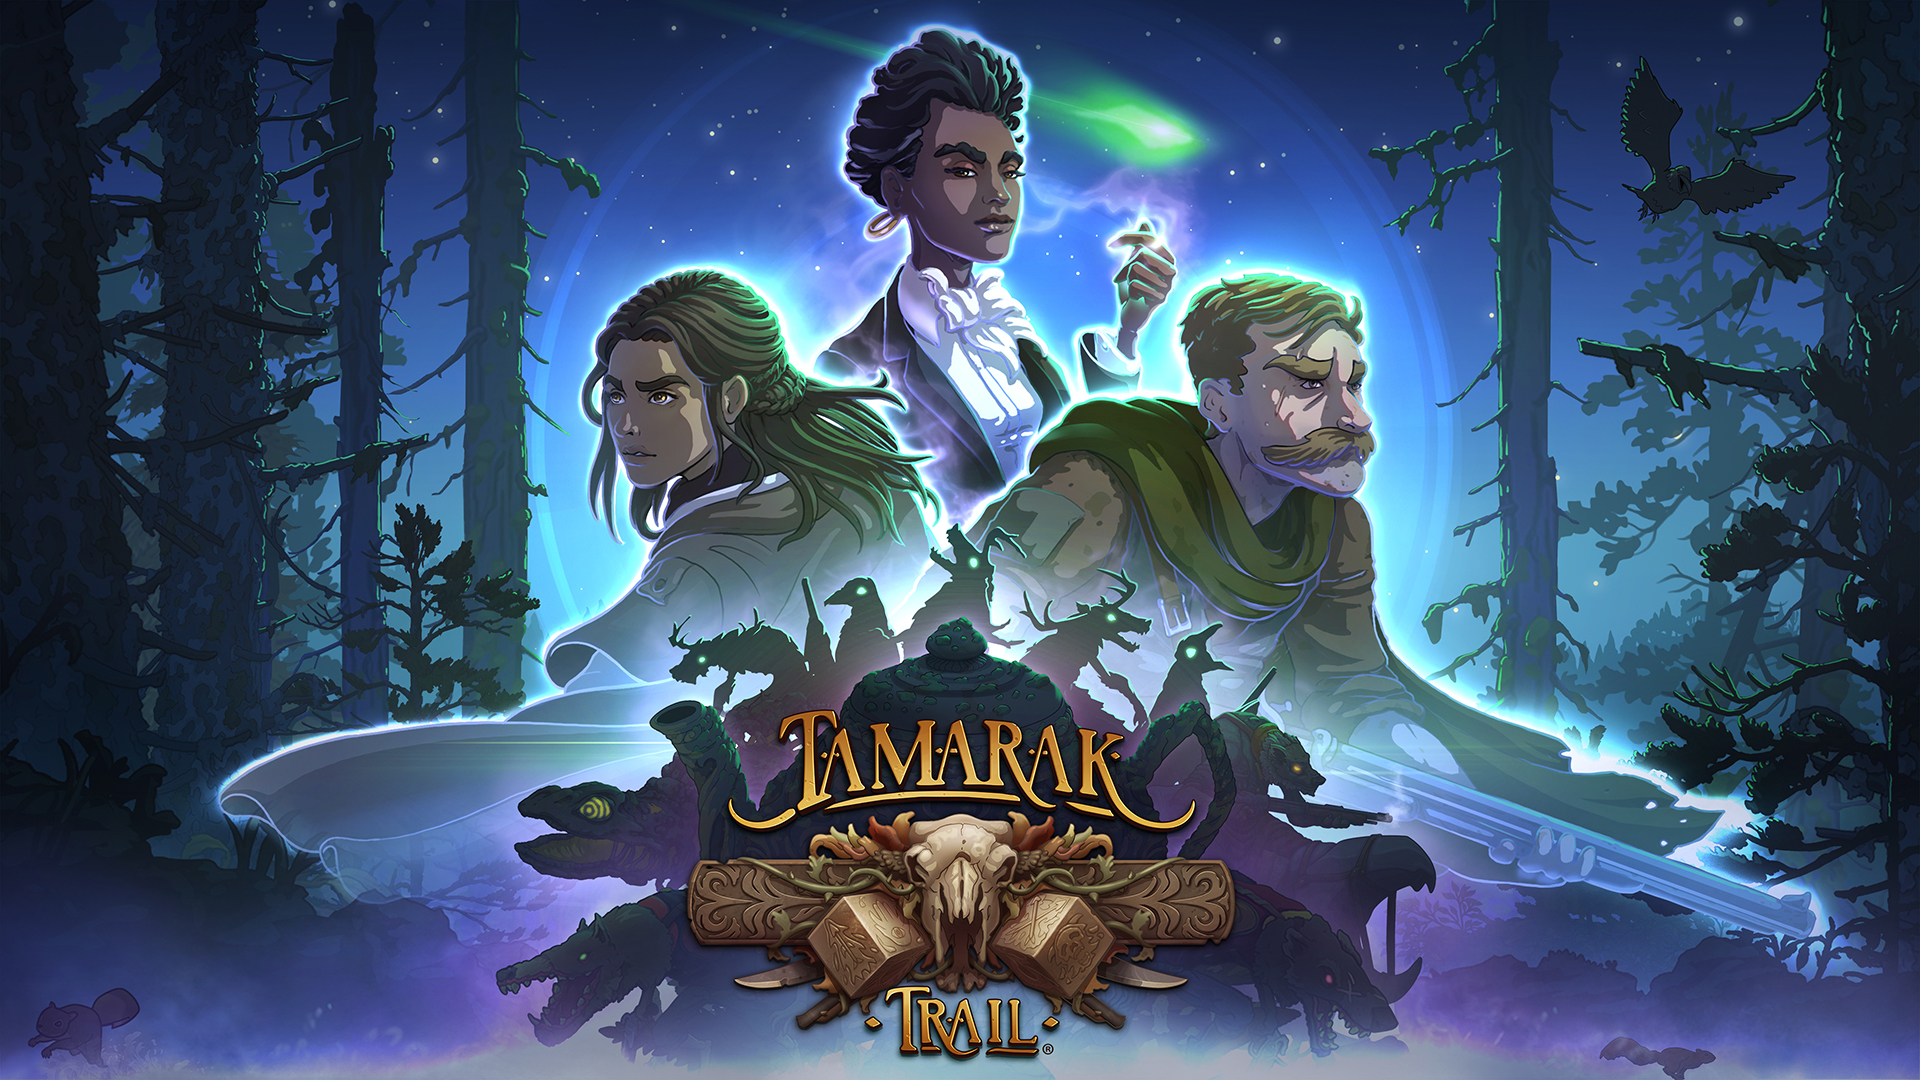 The key art for Tamarak Trail, featuring the three characters players can choose from.